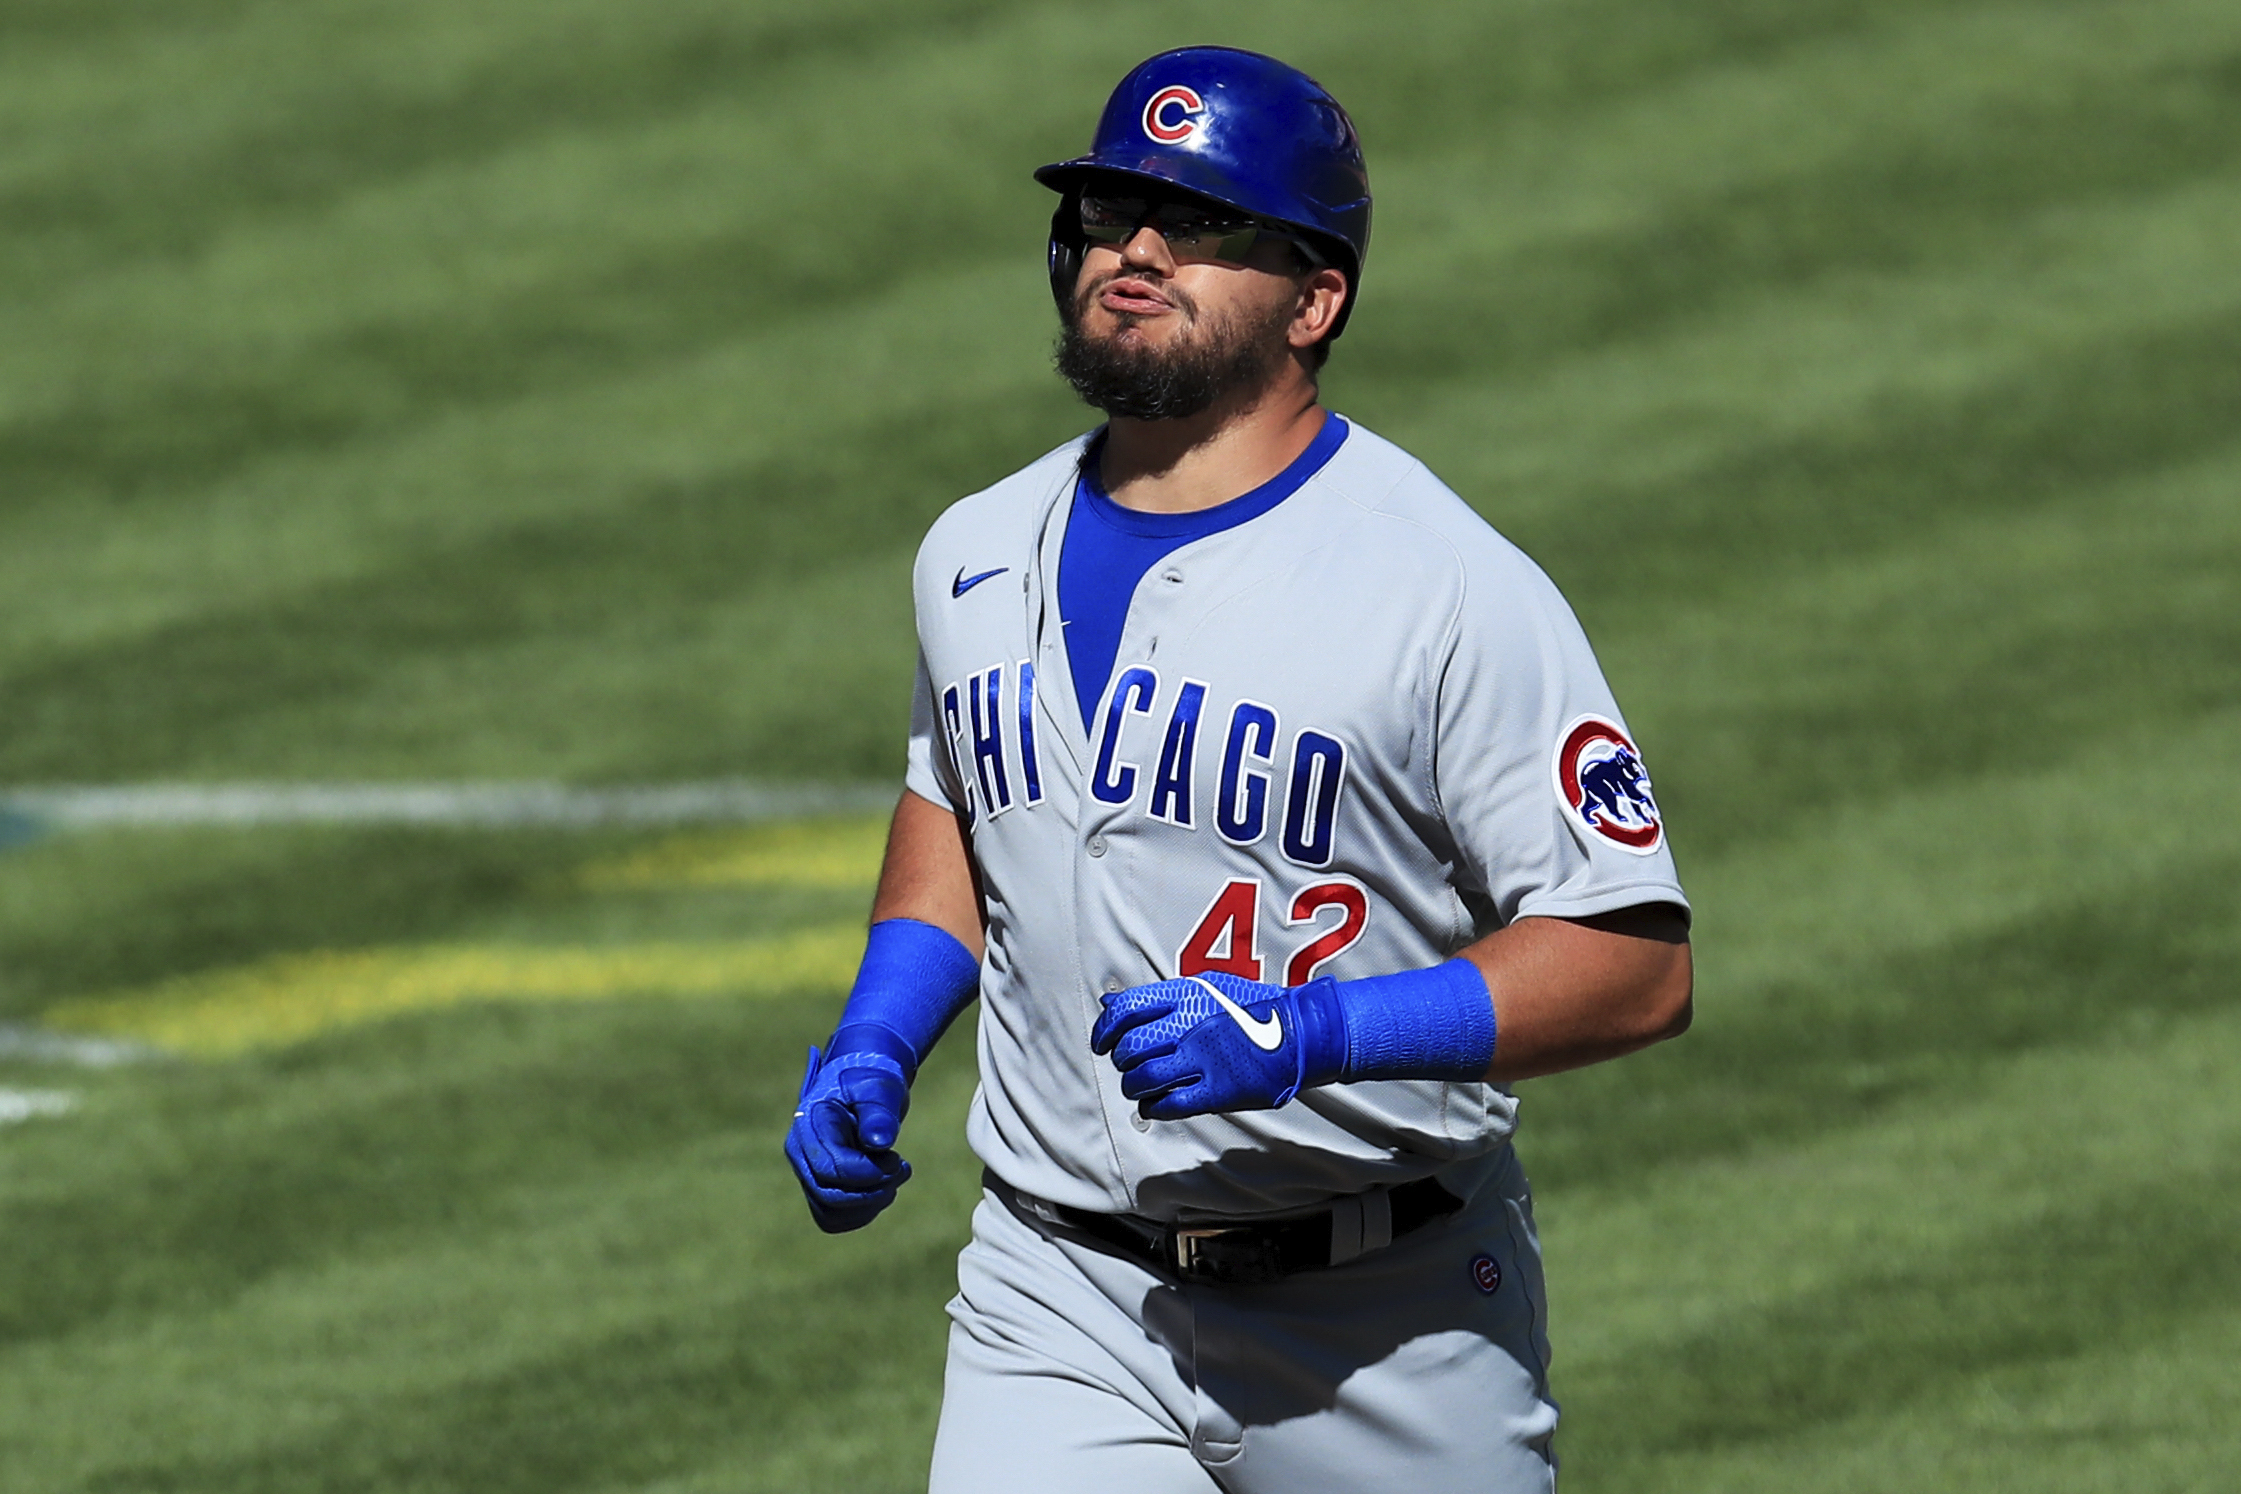 Chicago Cubs' Schwarber looking to build off big second half of